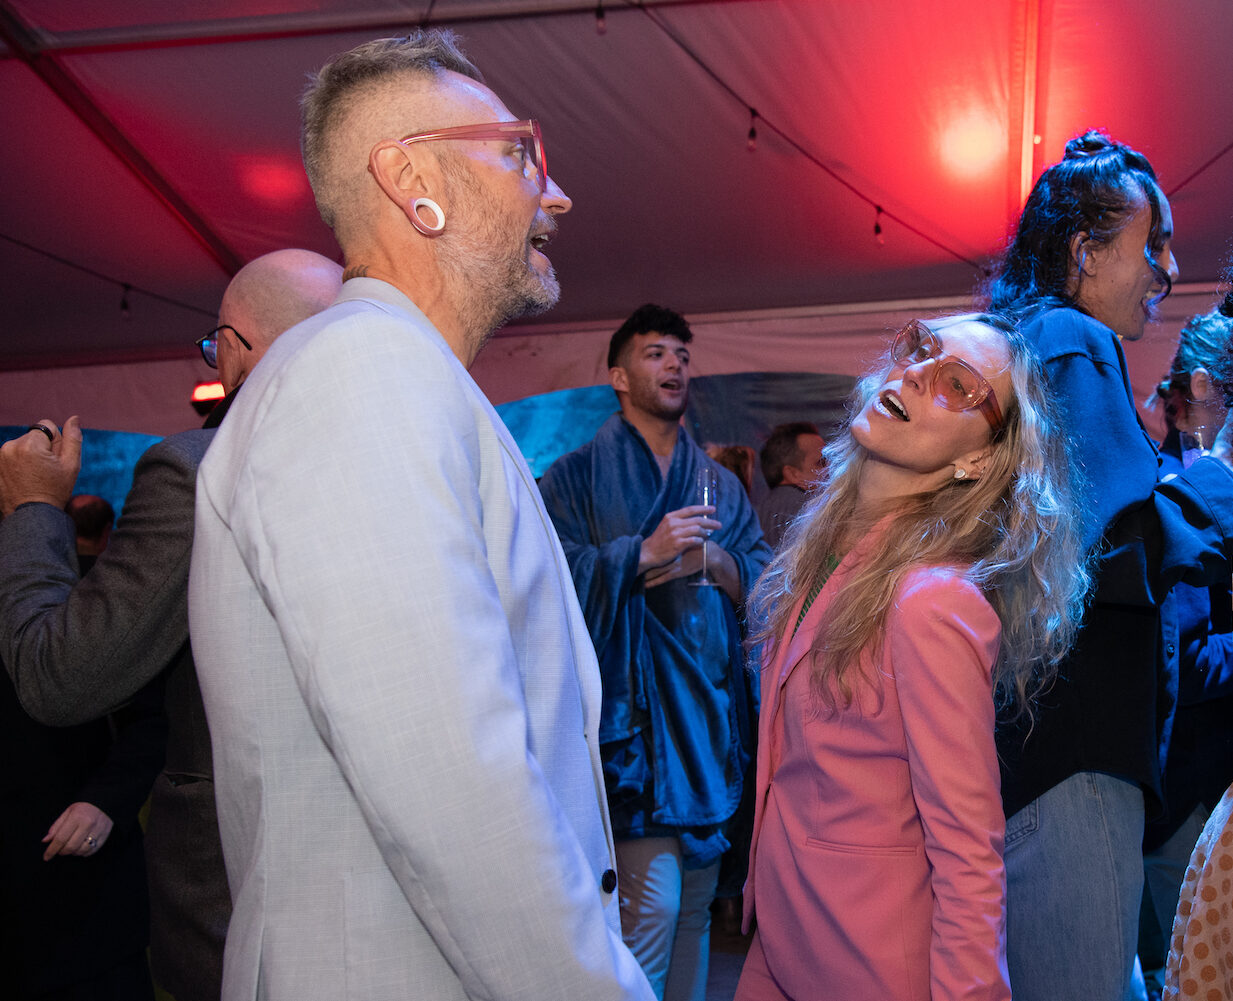 2 people dance at a party, both wearing light pink glasses.